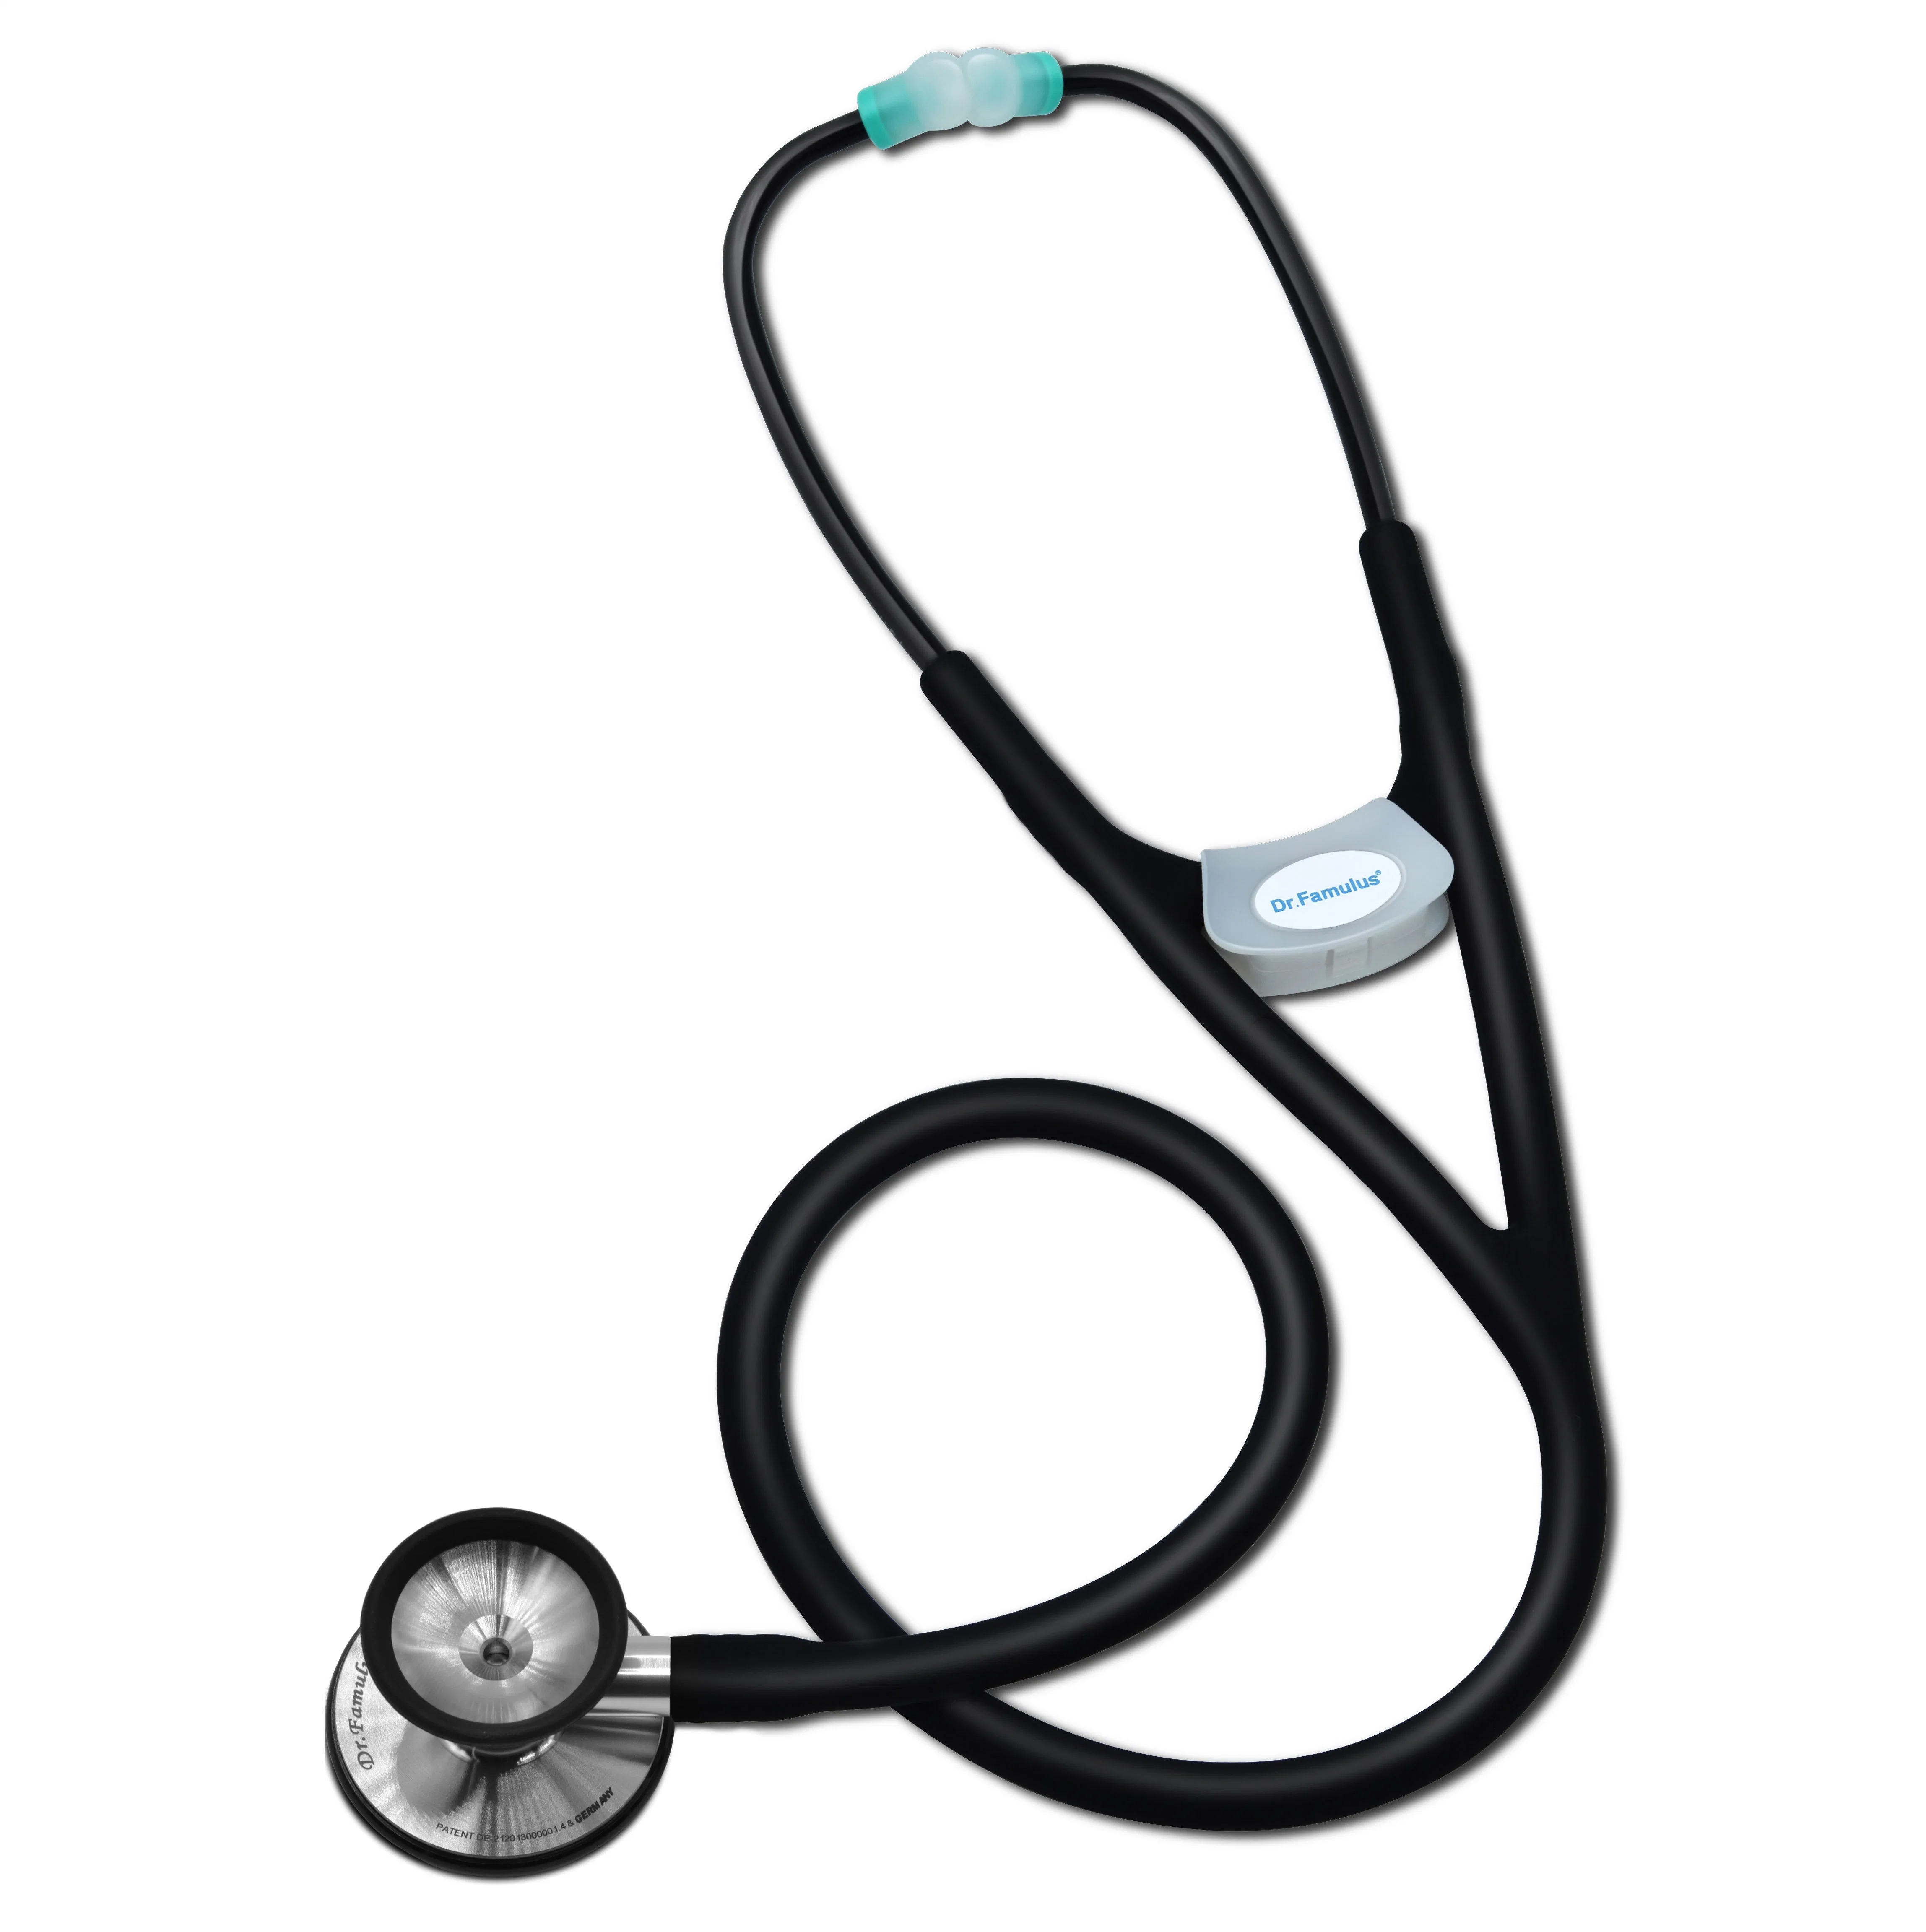 Professional Stethoscope with Dual Head Cardiology Stethoscope for Heart and Lung Sounds